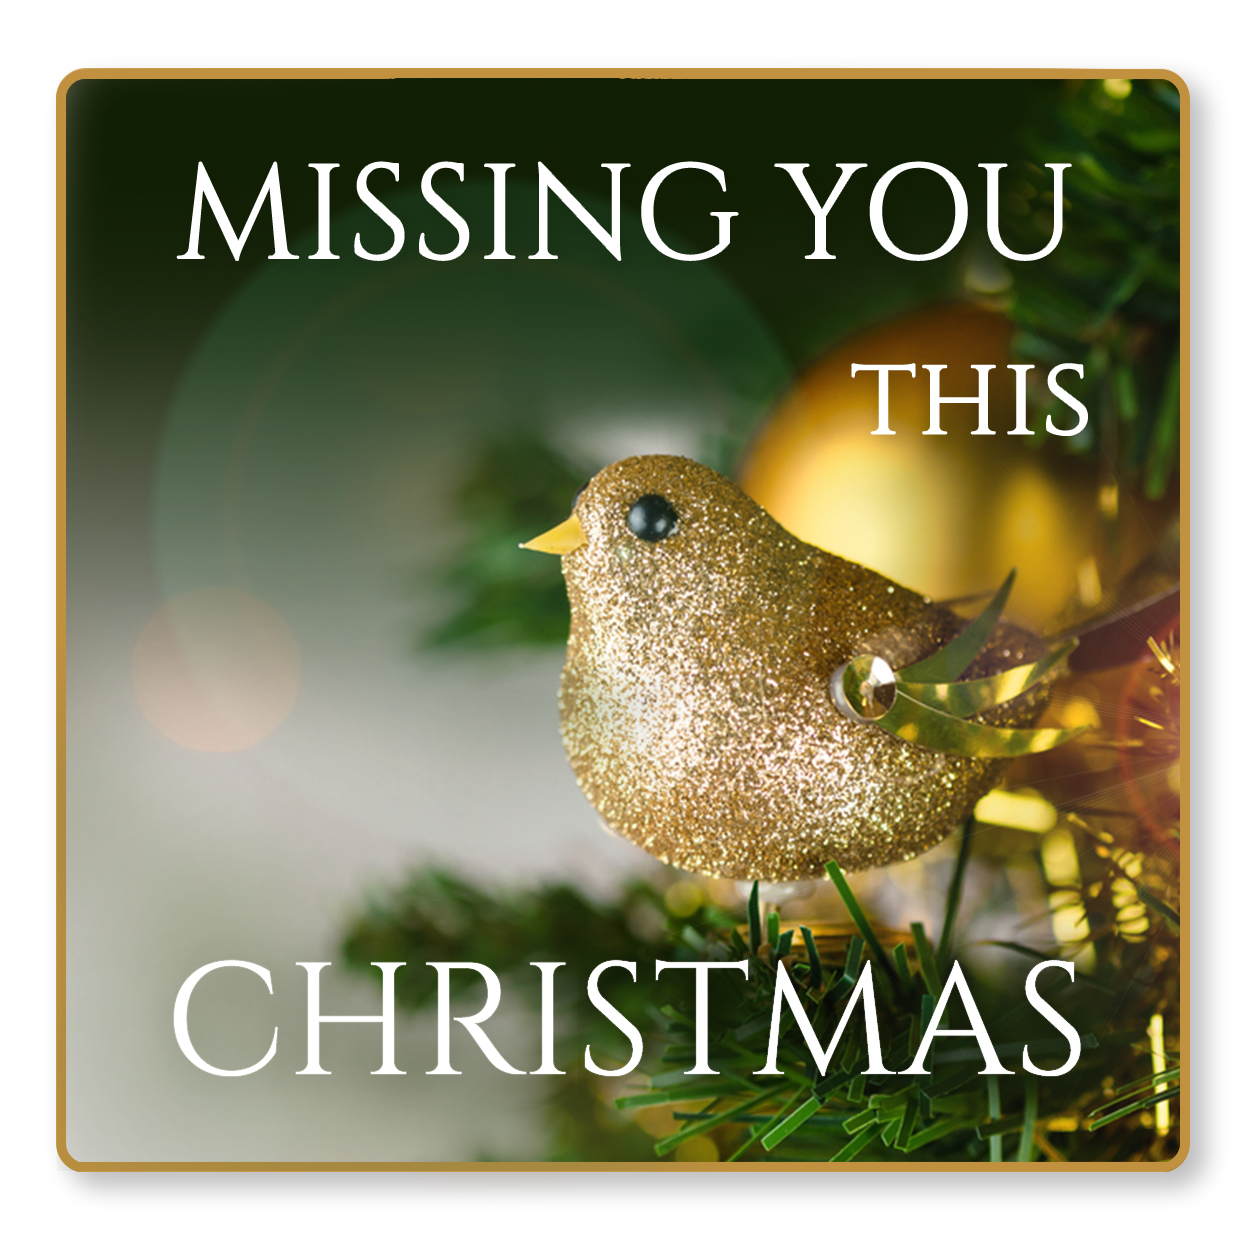 Missing You This Christmas - sent on November 29th, 2022